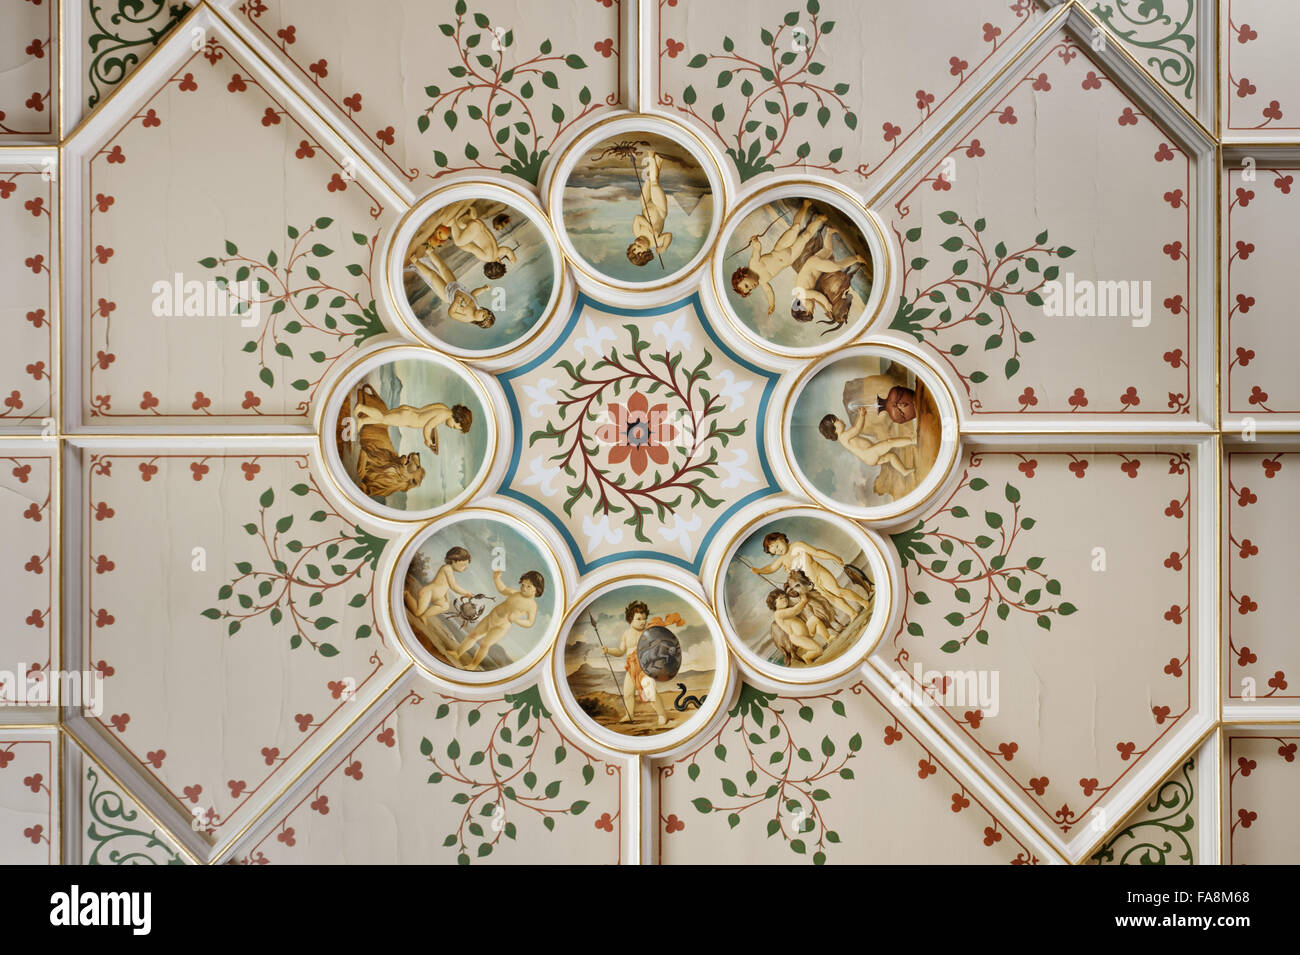 The Zodiac roundels on the ceiling in the Boudoir at Knightshayes Court, Devon. The roundels were repainted in 1981 by Ian Cairnie, the design was based closely on the scheme devised by John Dibblee Crace. Stock Photo